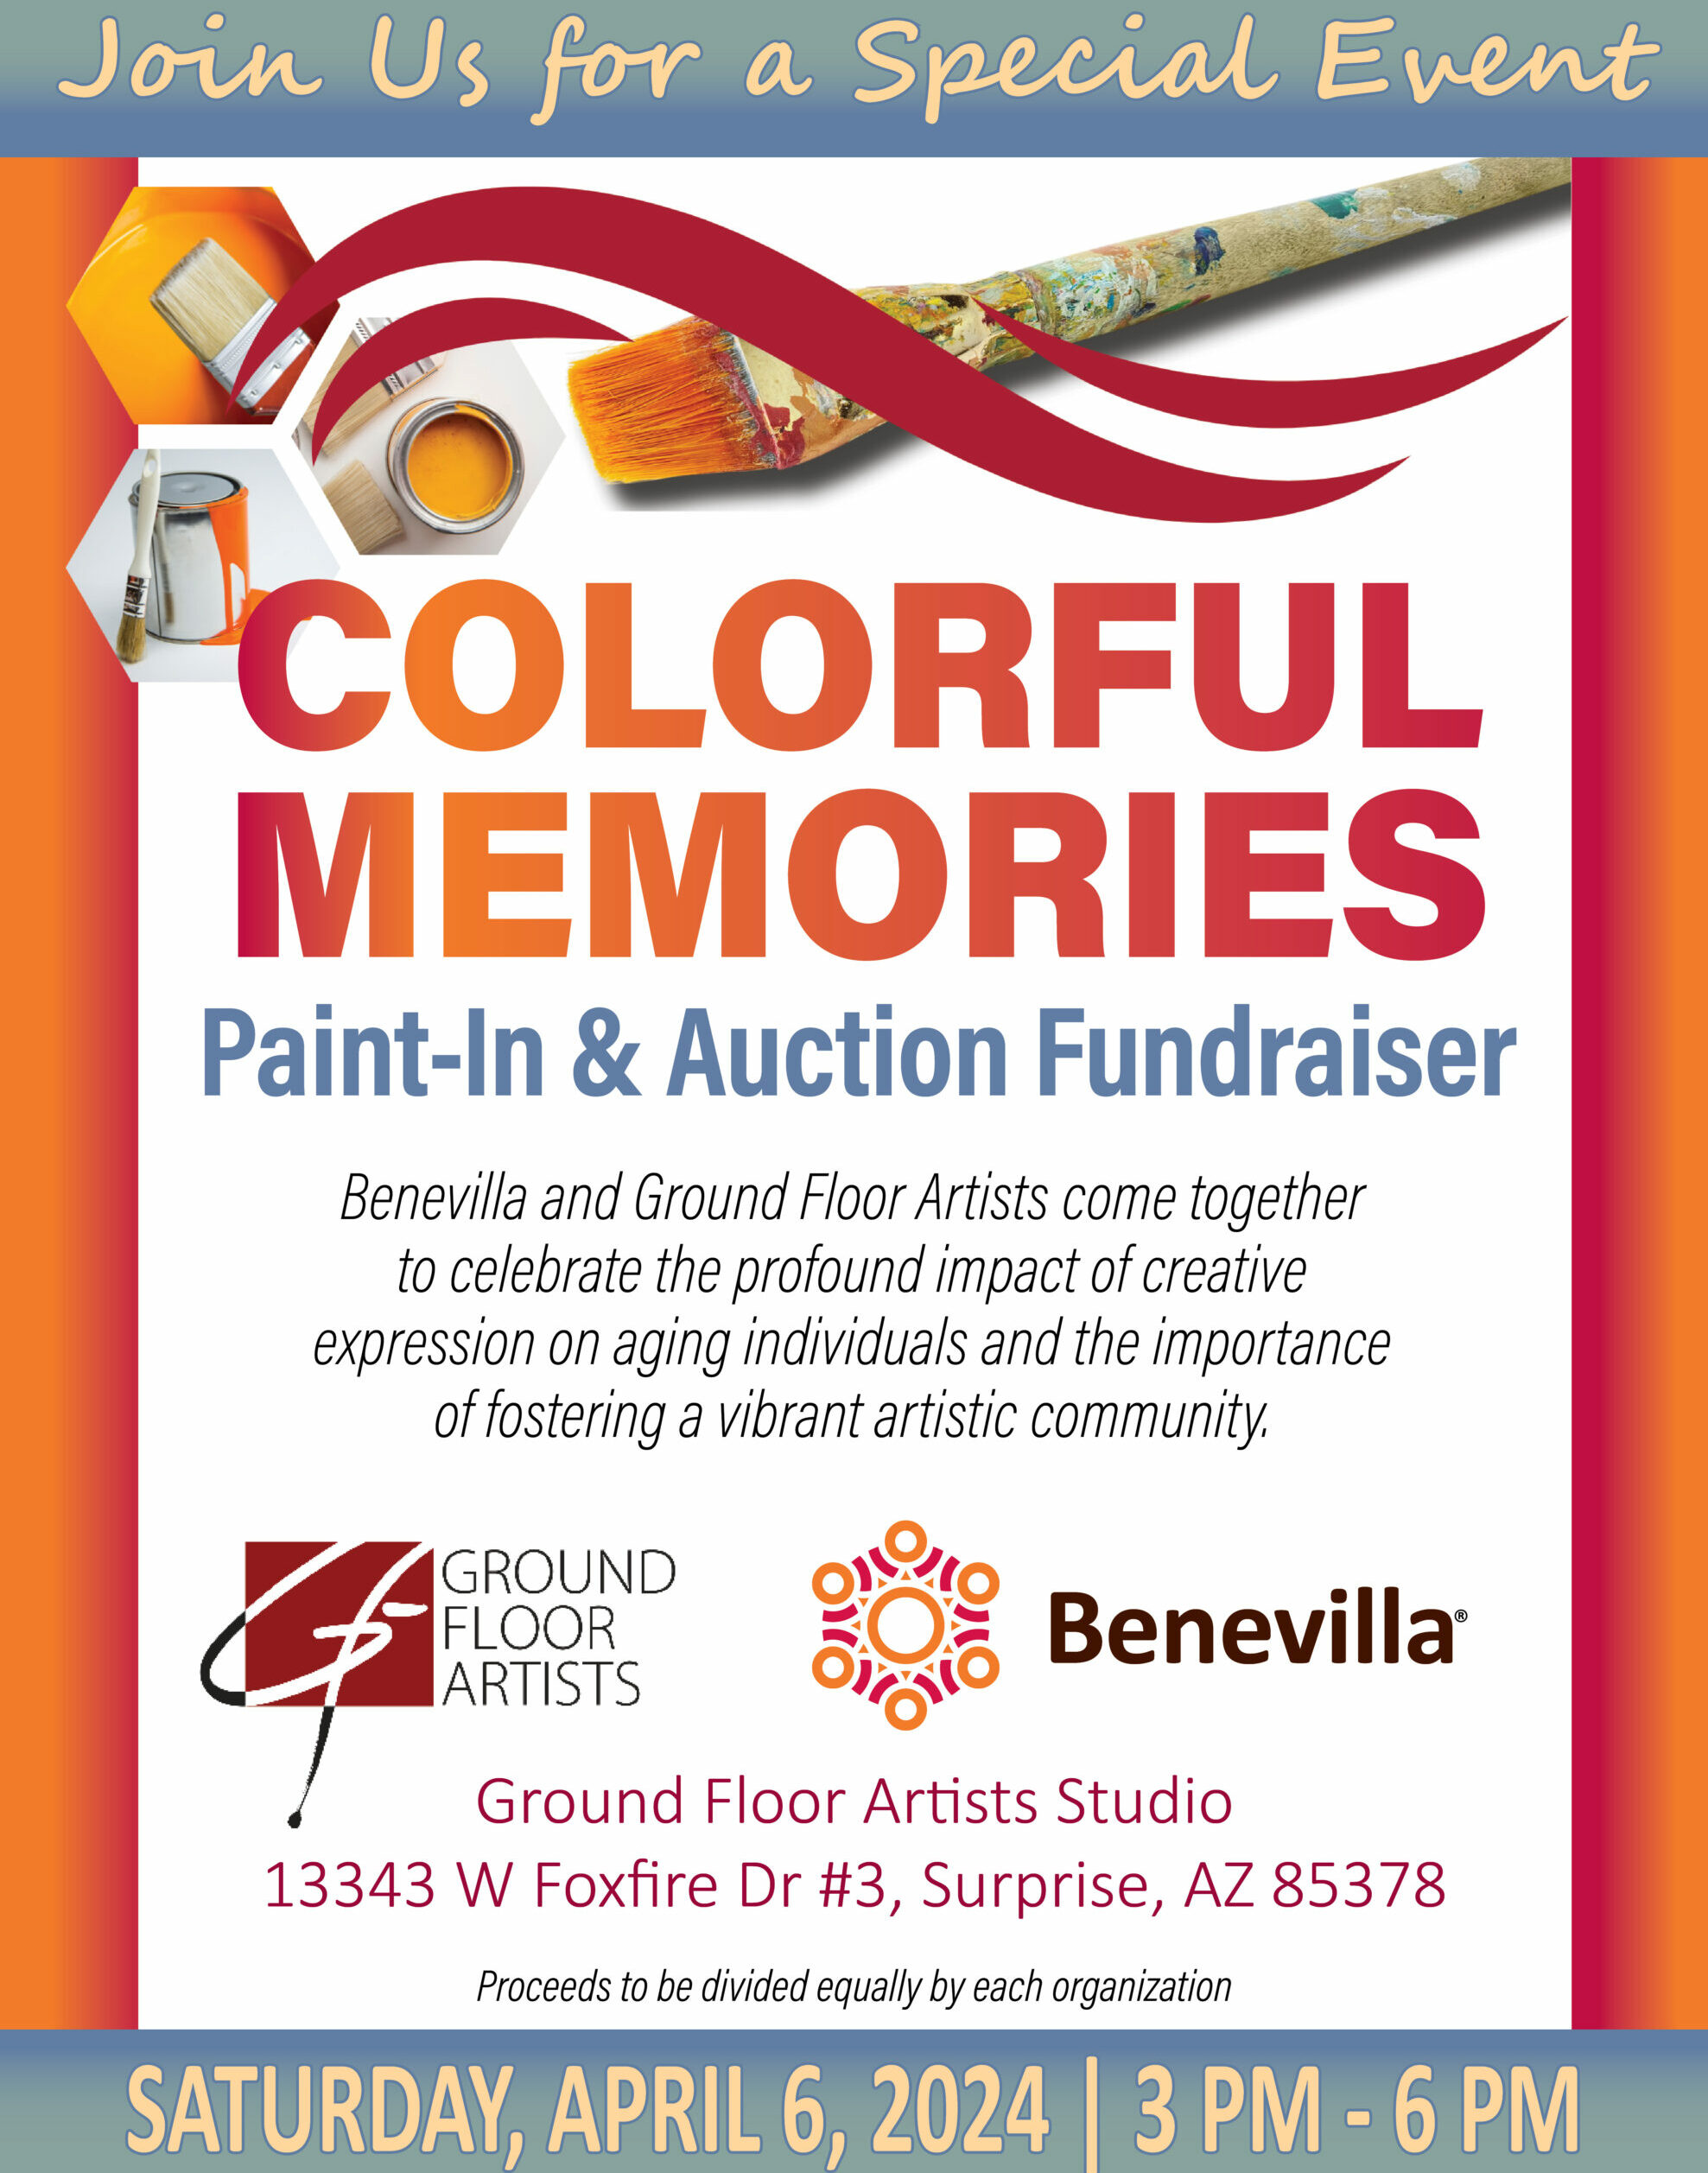 Benevilla Ground Floor Artists Colorful Memories Paint-In and Auction Fundraiser